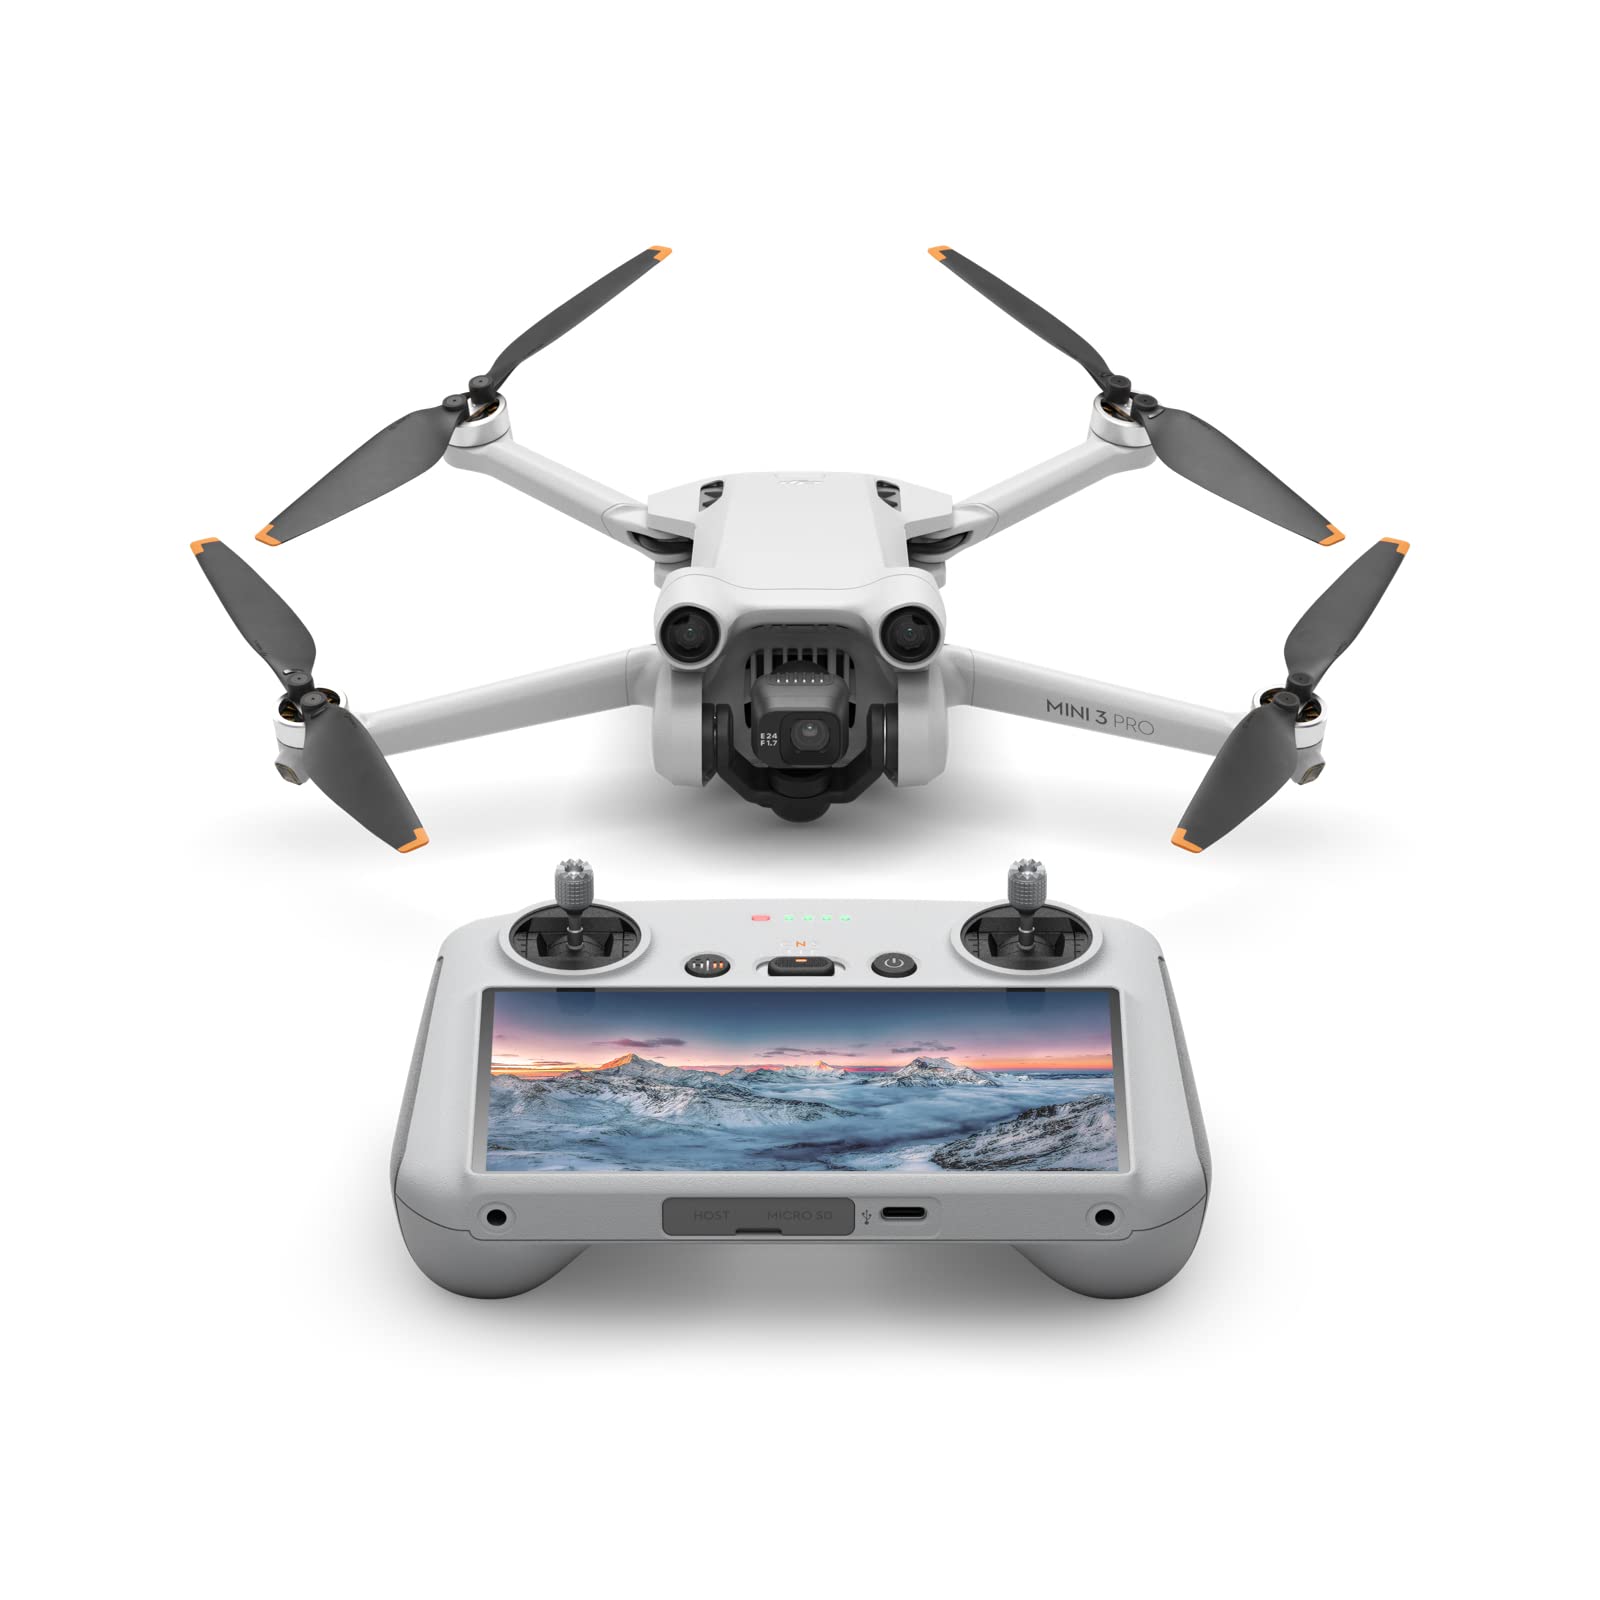 DJI Mini 3 Pro ( RC) – Lightweight and Foldable Camera Drone with 4K/60fps Video, 48MP Photo, 34-min Flight Time, Tri-Directional Obstacle Sensing, Ideal for Aerial Photography and Social Media